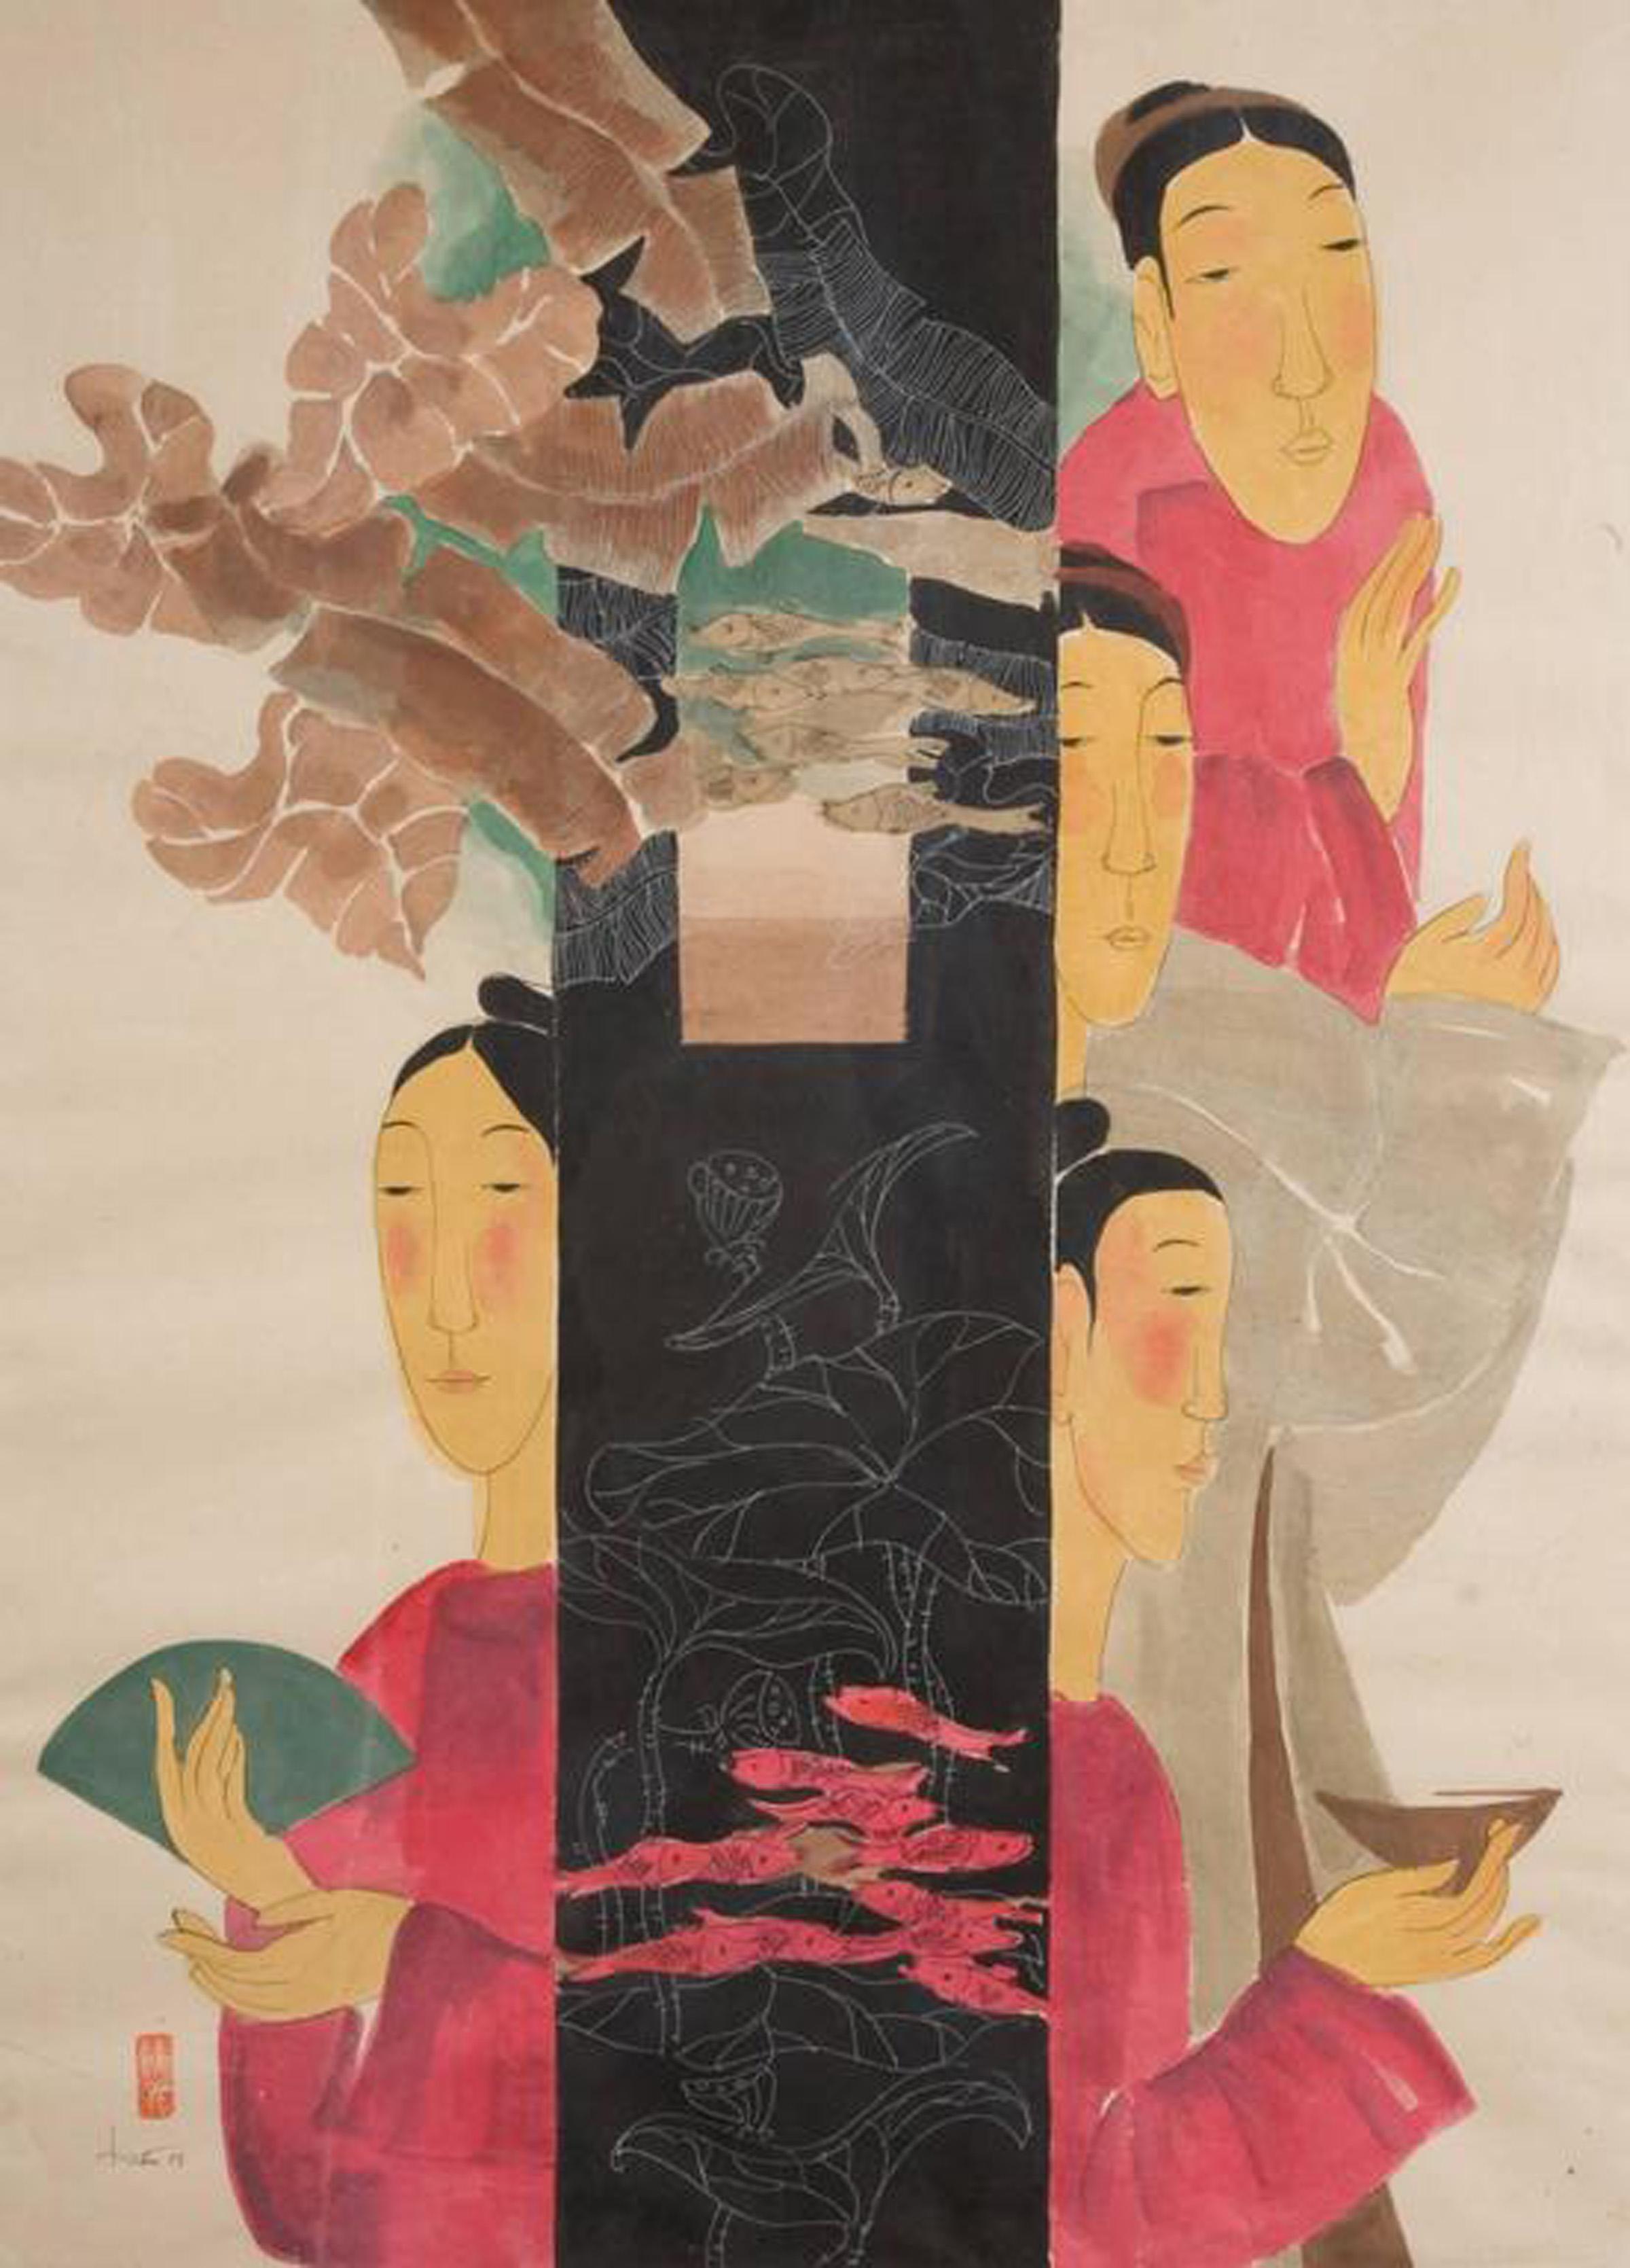 ‘Blessings’ is a large framed watercolor on rice paper figurative piece created by Vietnamese artist Vu Thu Hien in 2008. Featuring an exquisite palette made of red, beige, gold and black tones, the painting depicts four women, dressed in ceremonial